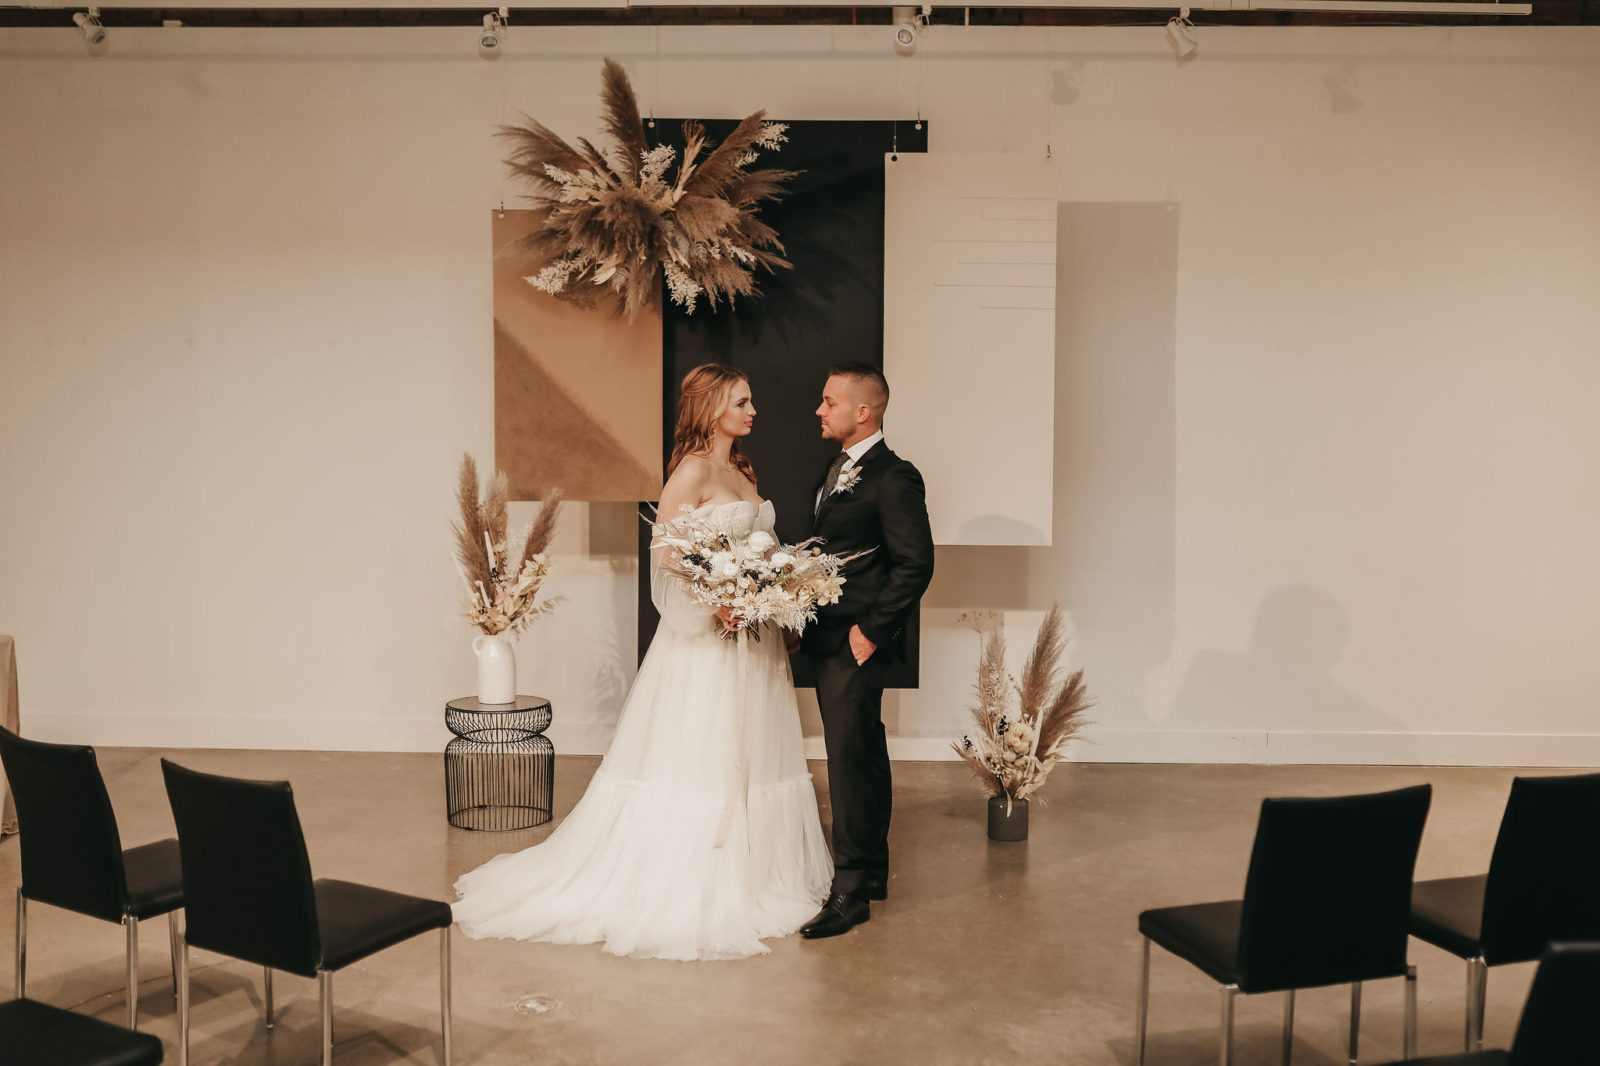 Modern and abstract wedding ceremony design inspiration from the Pioneer in Calgary Alberta